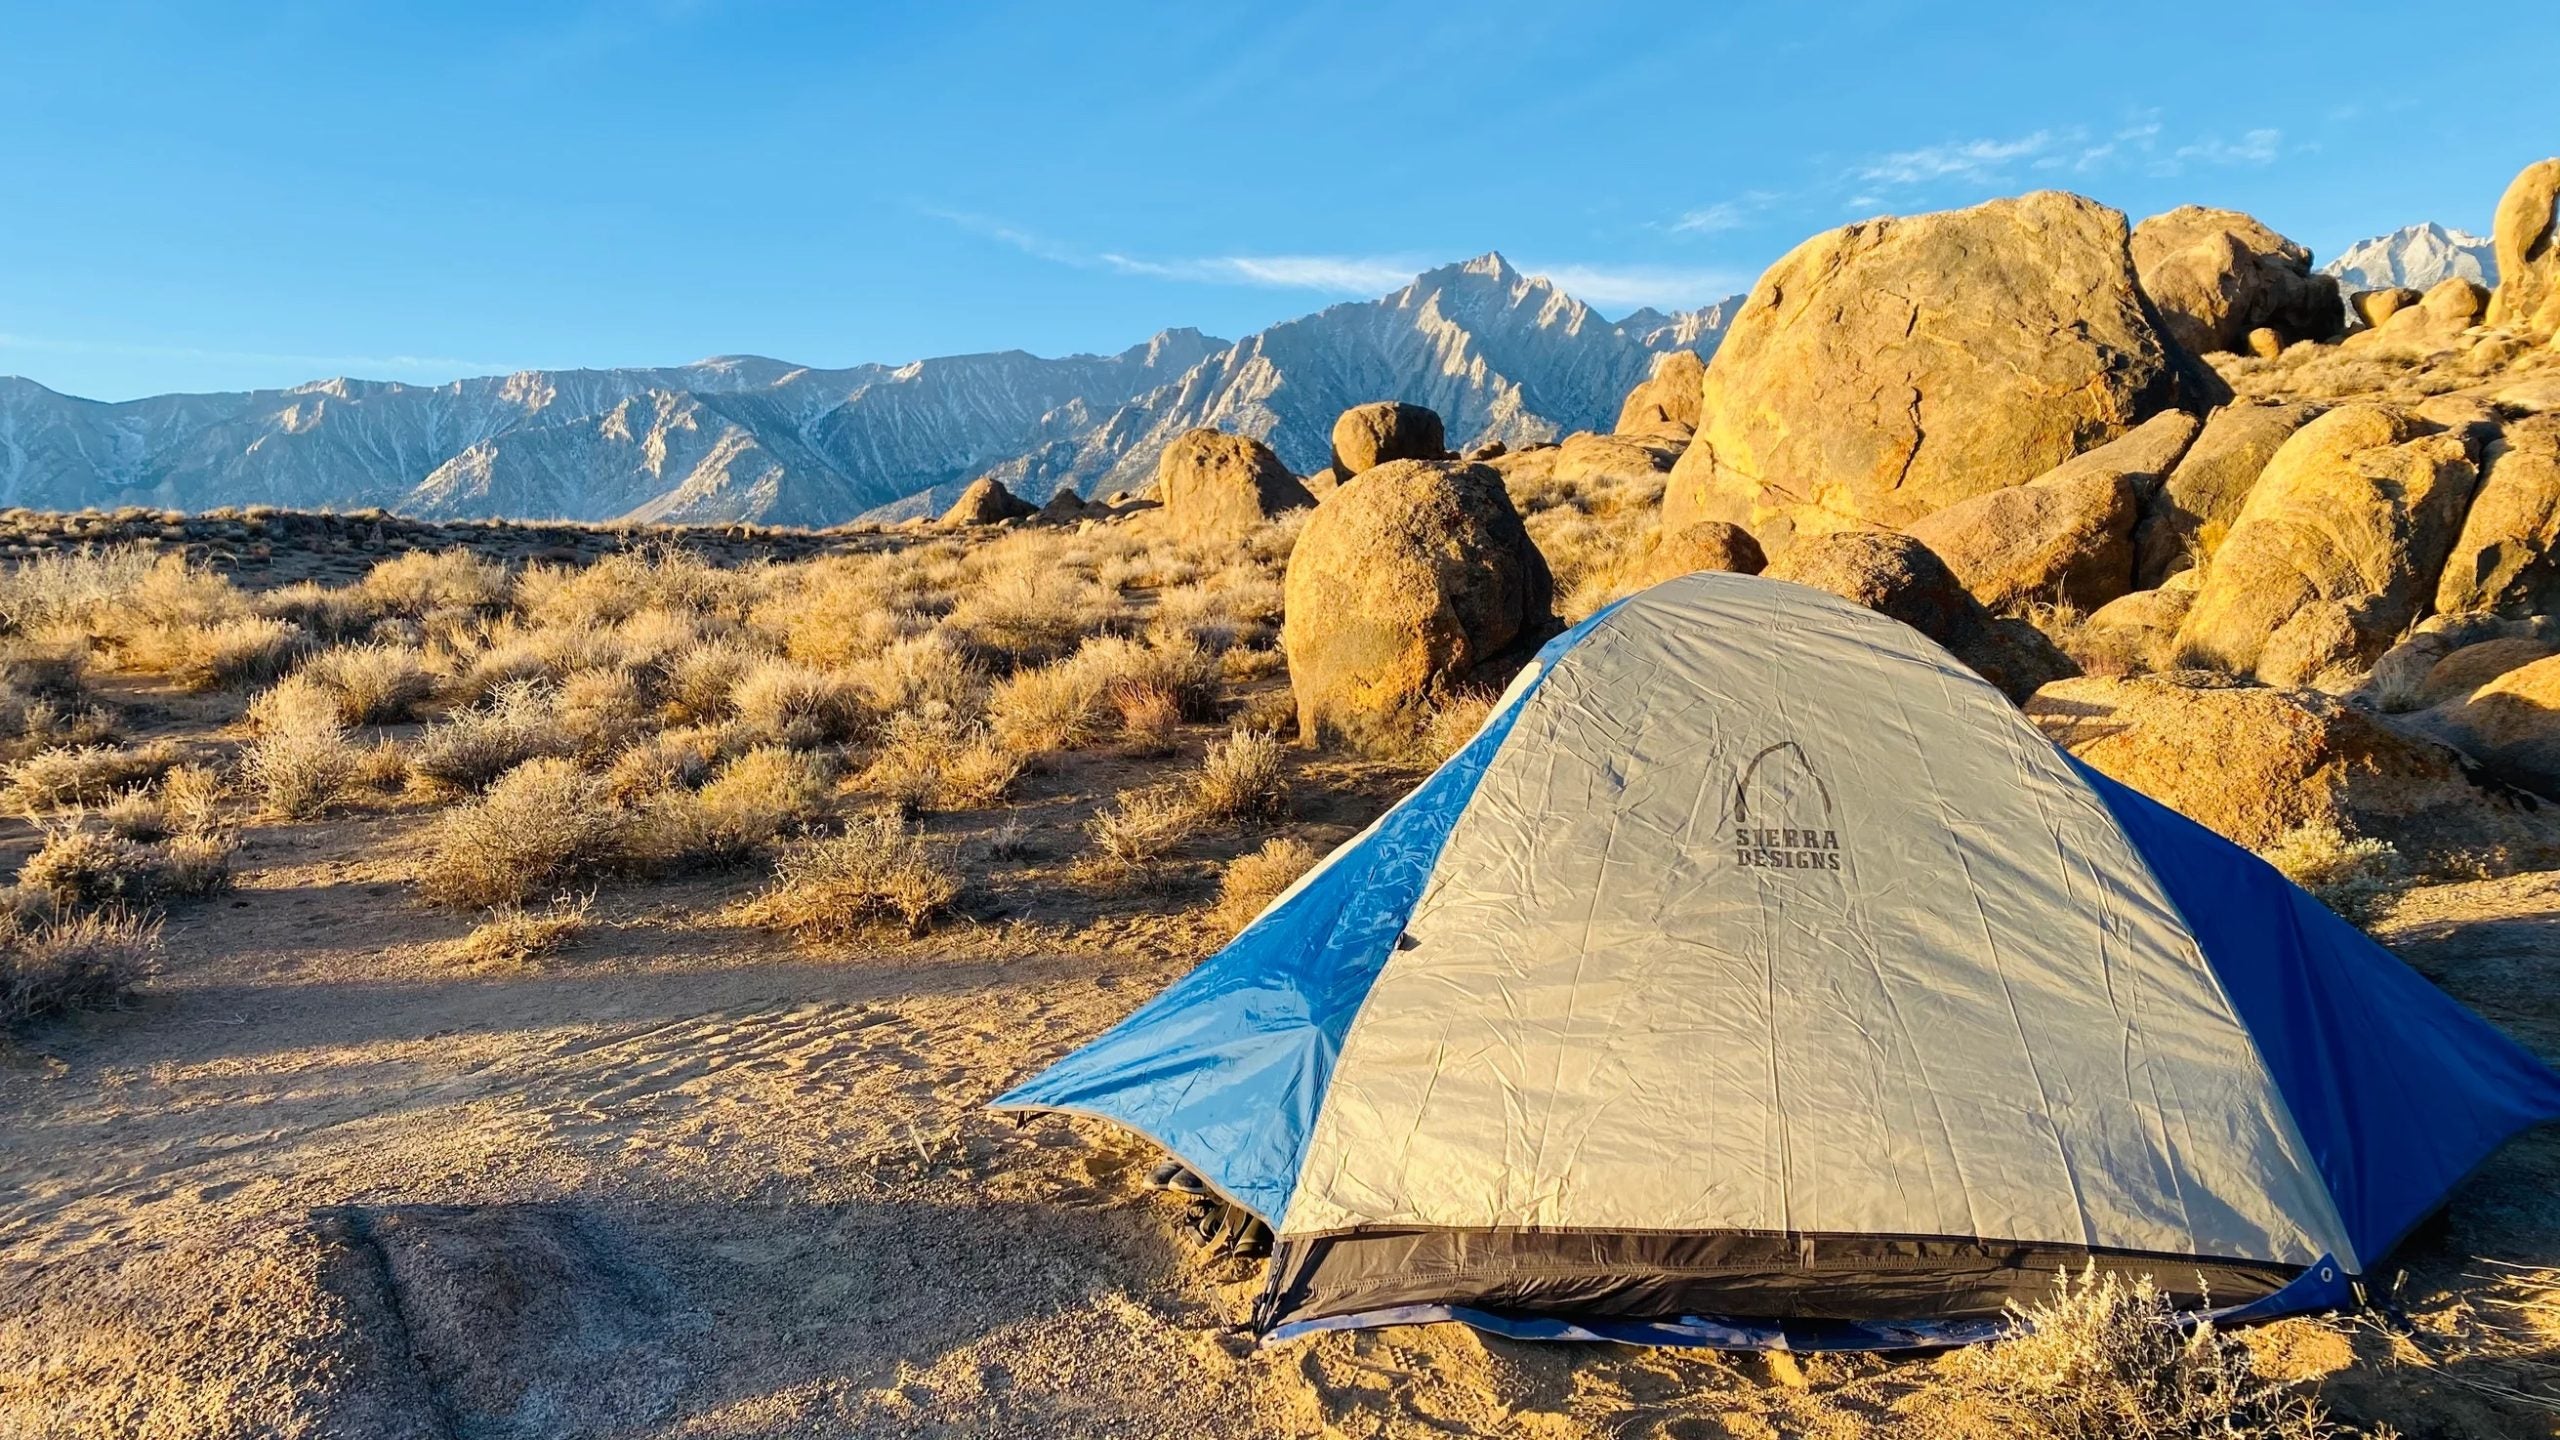 Tent campsite surrounded by mountains in Alabama Hills